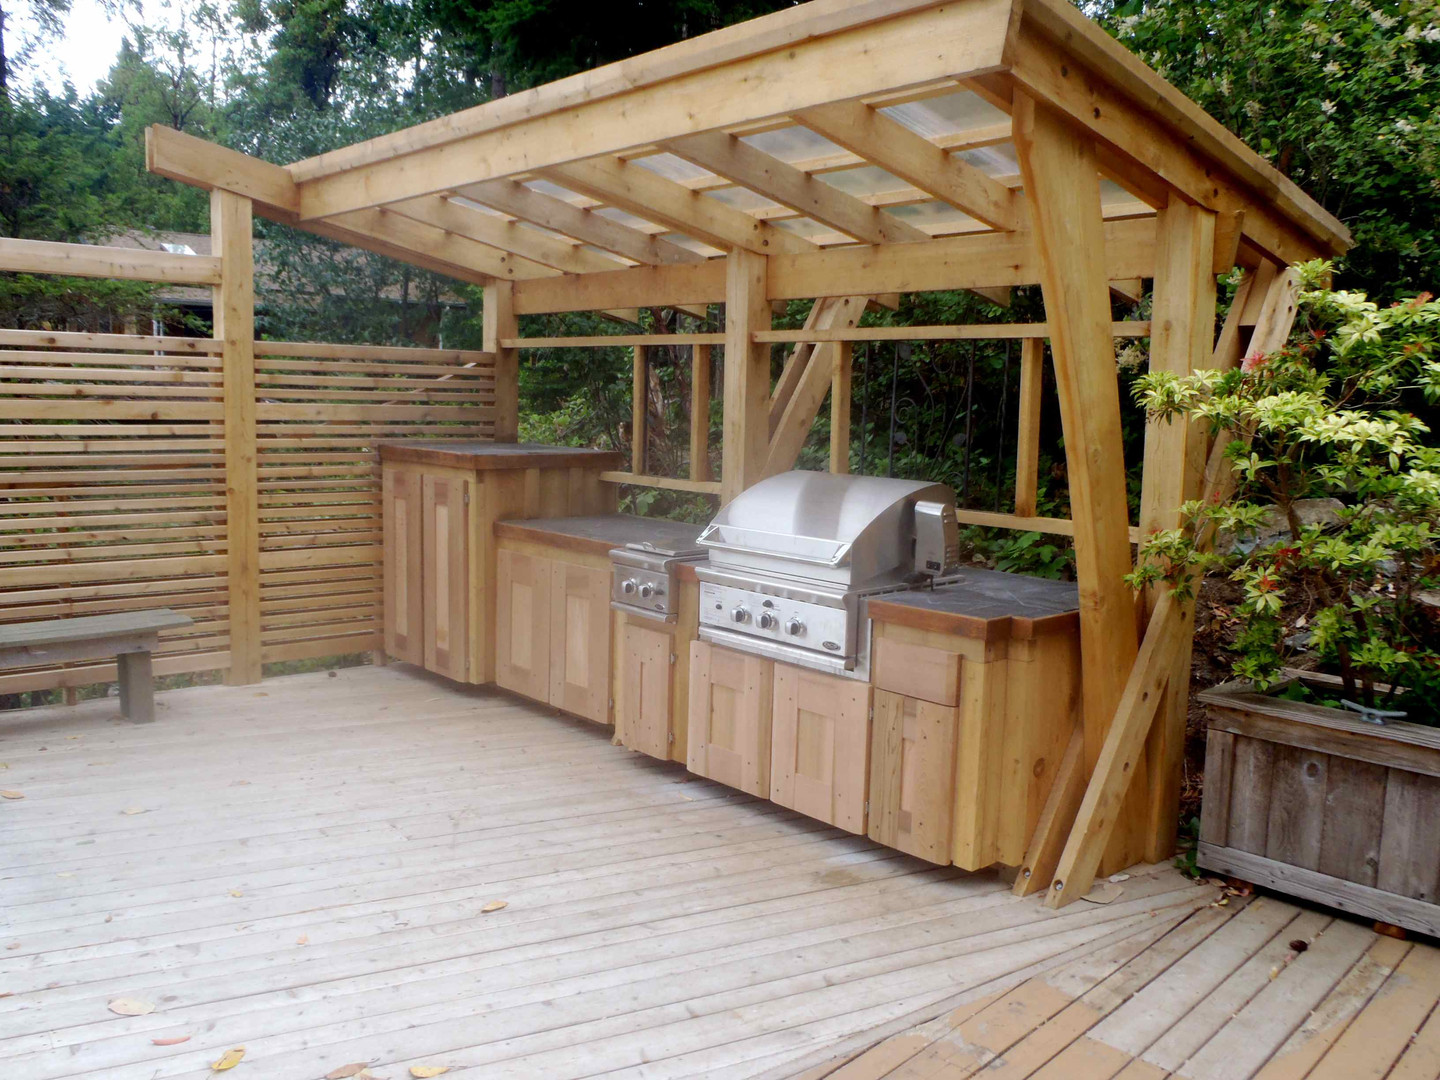 Homemade Outdoor Kitchen
 These DIY Outdoor Kitchen Plans Turn Your Backyard Into